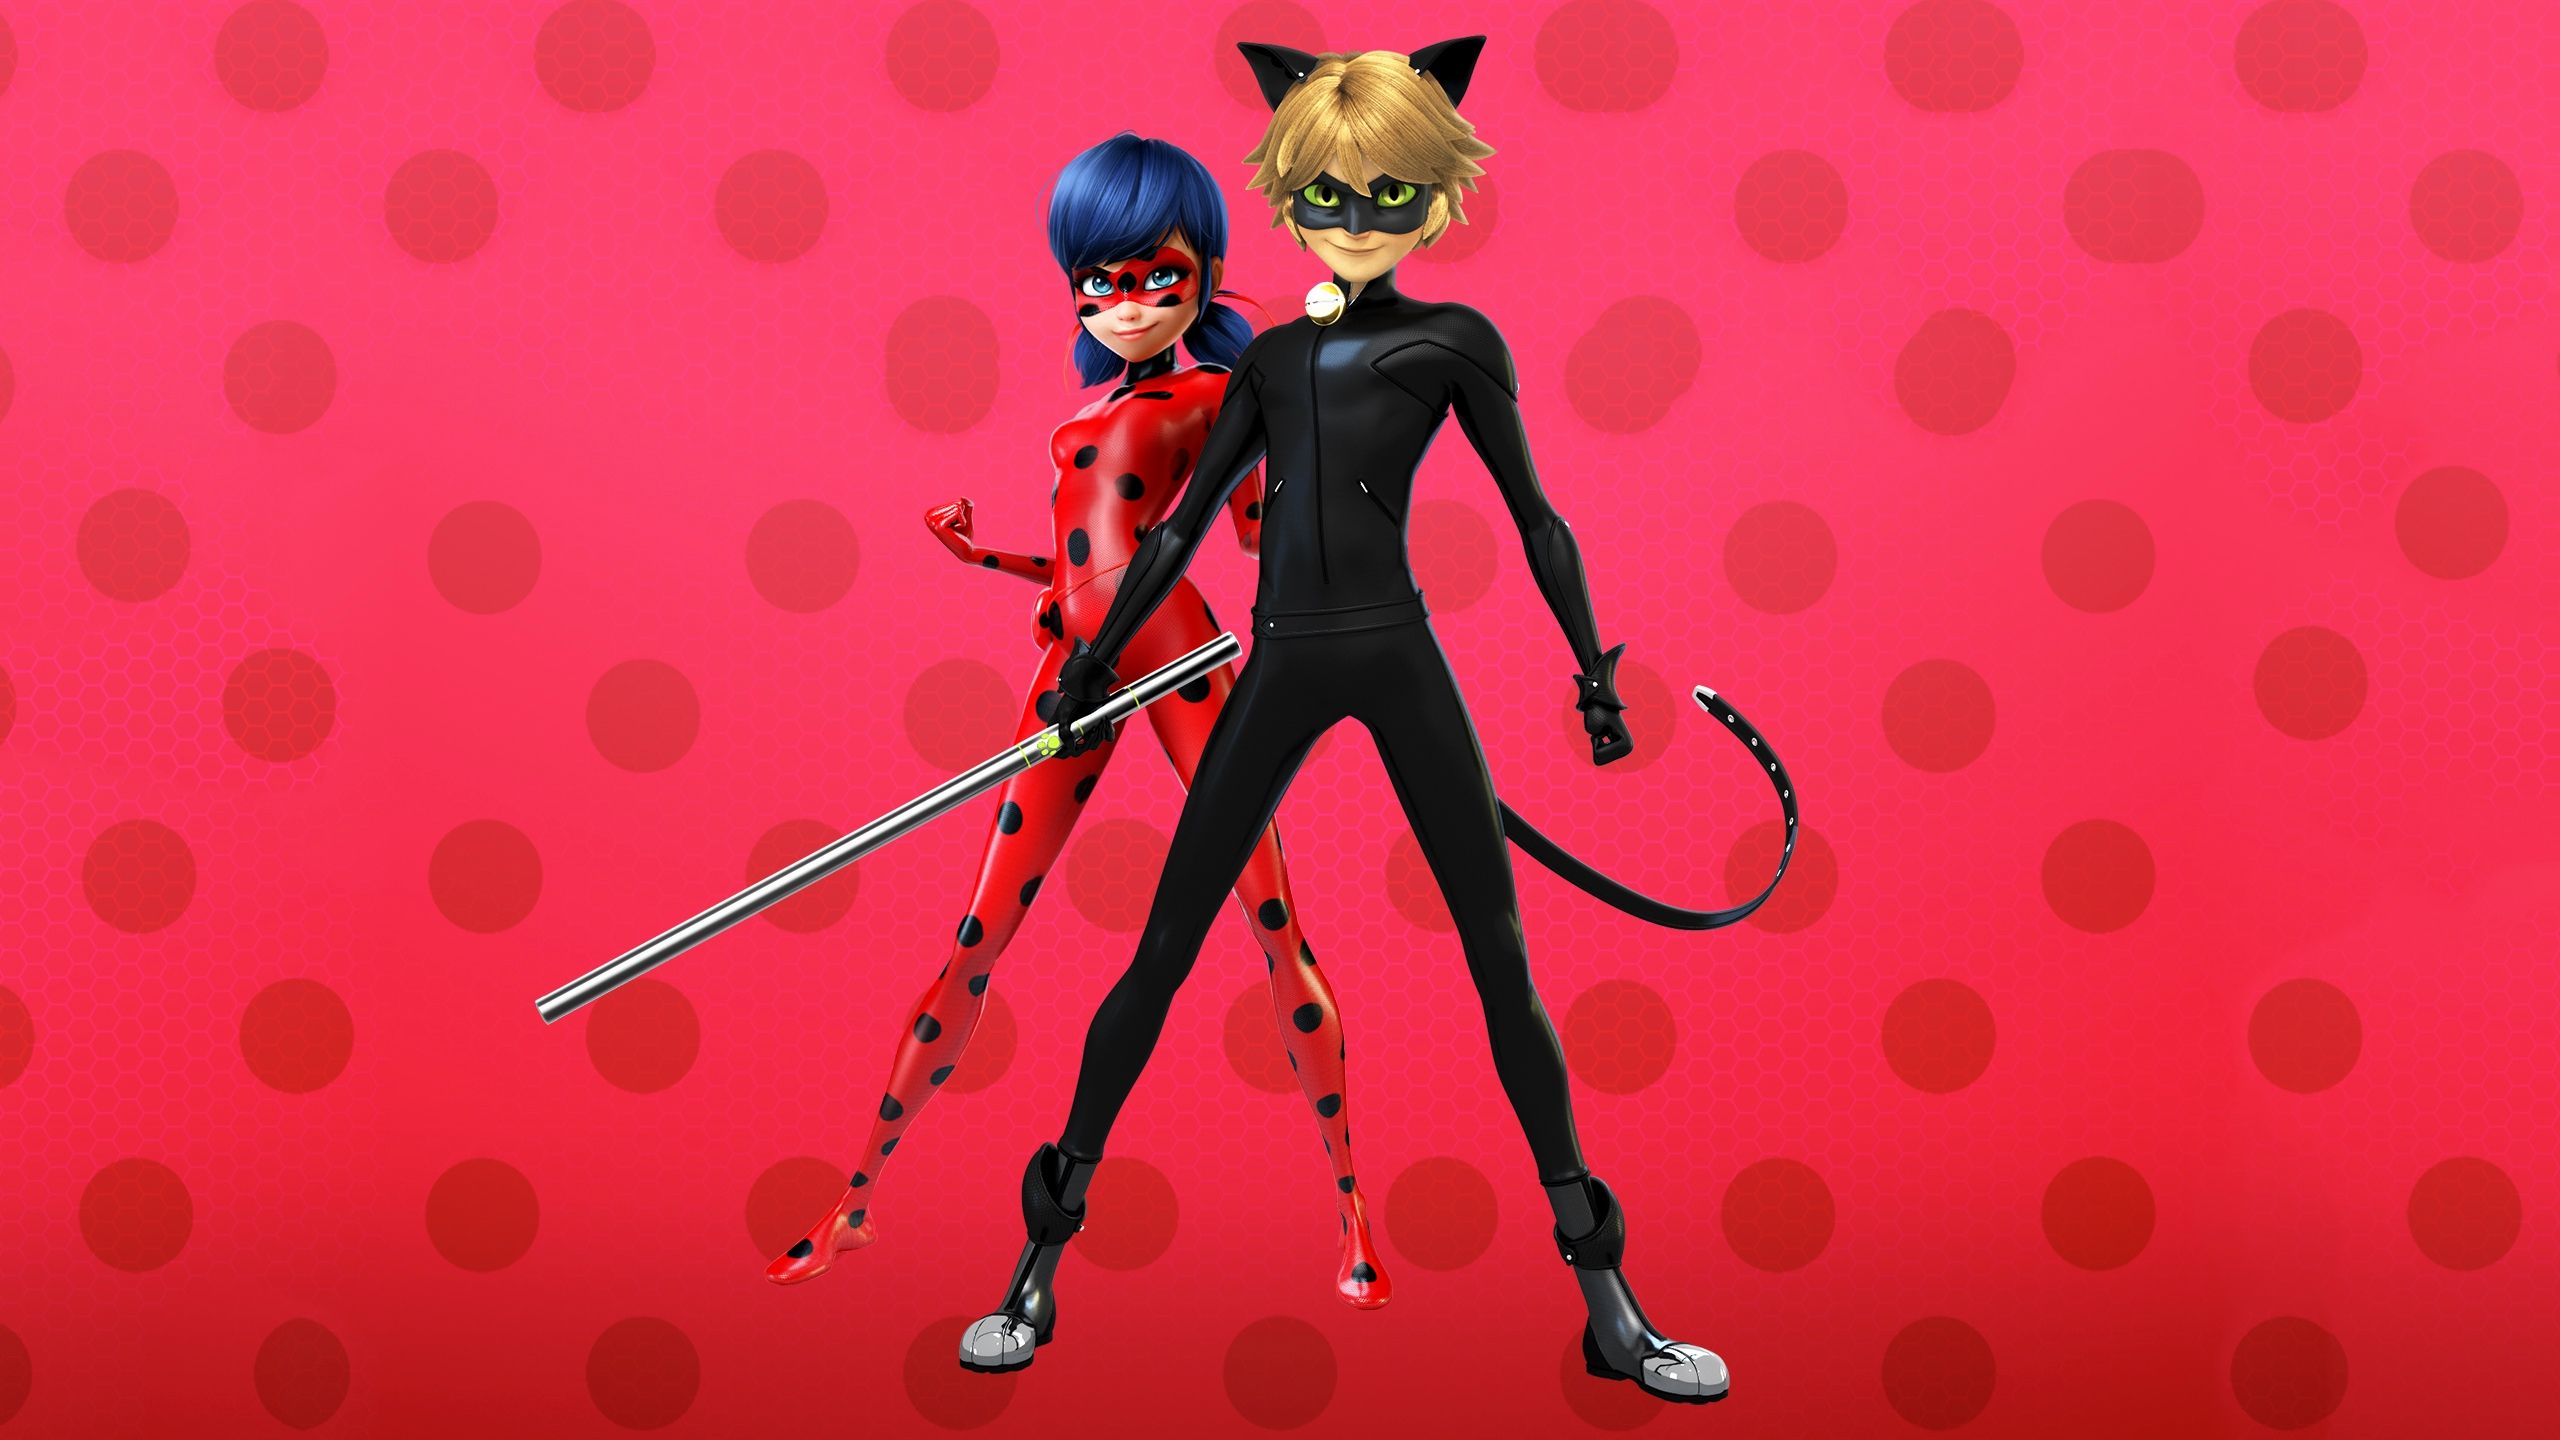 Ladybug and Cat Noir Wallpaper Fresh Miraculous Ladybug HD Wallpaper Youloveit This Week of The Hudson